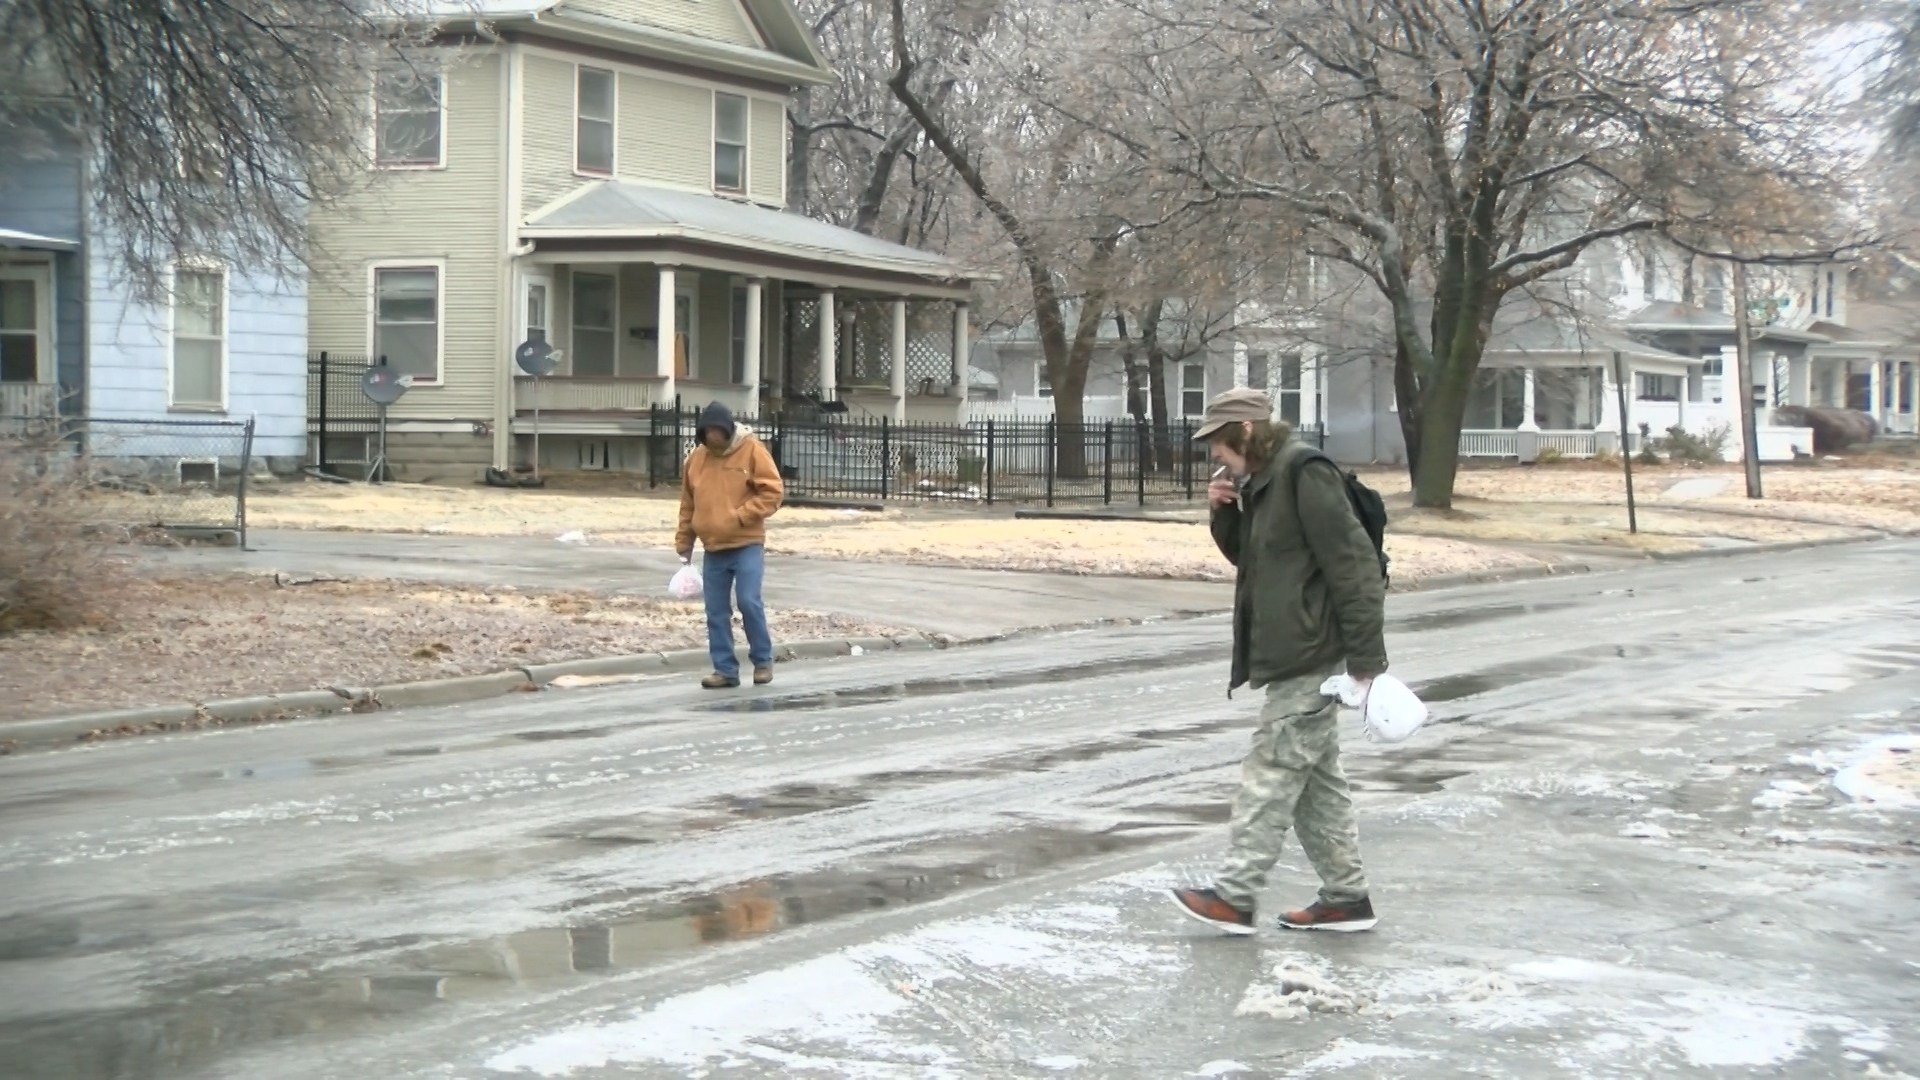 Sidewalks and side streets remain icy